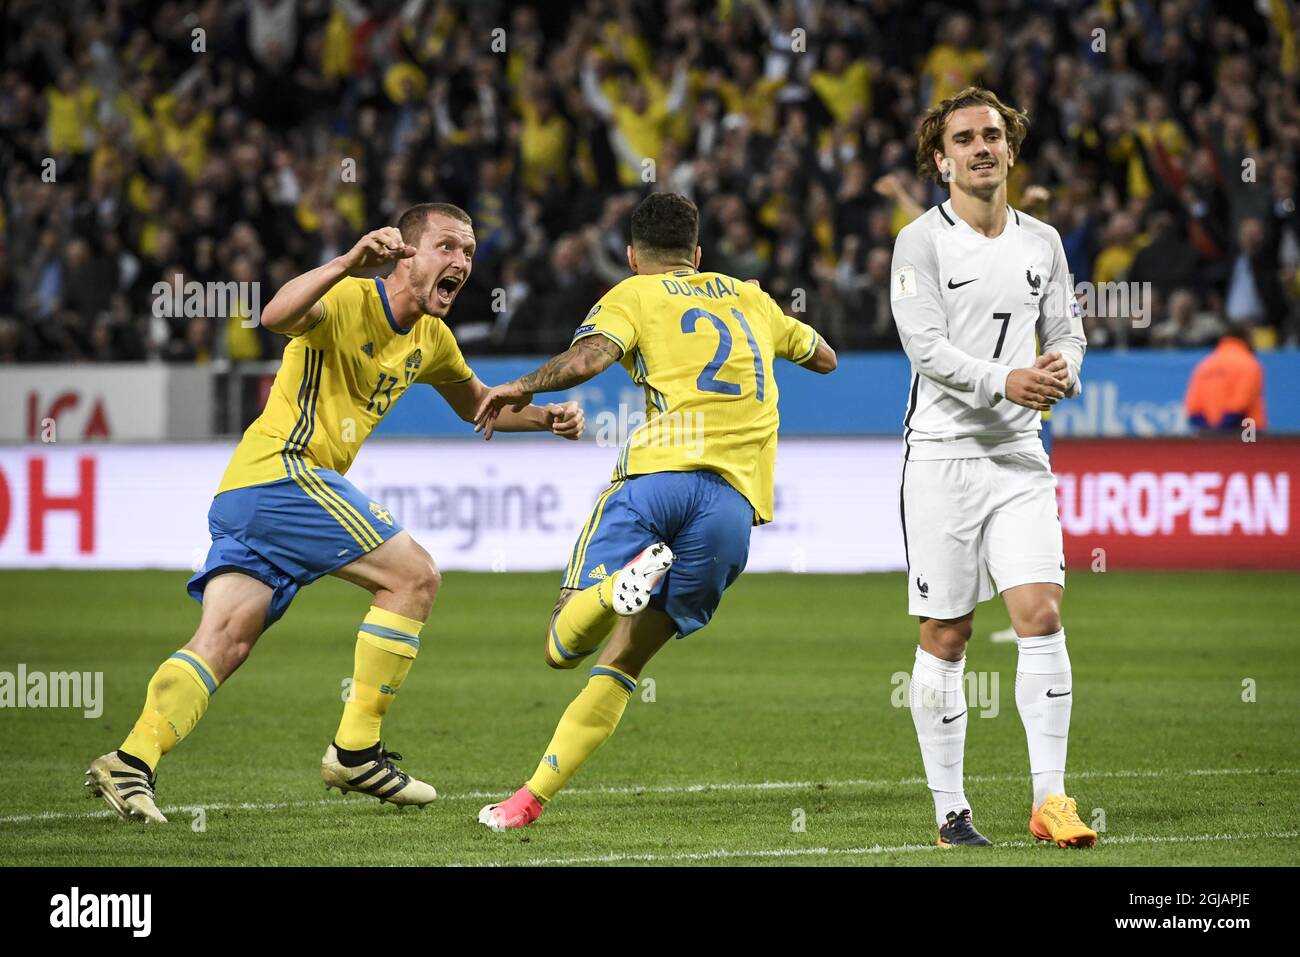 Sweden's Jimmy Durmaz C) celebrates scoring with teammate Jakob Johansson (L) as France's Antoine Griezmann (R) looks on during the FIFA World Cup 2018 group A qualifying soccer match between Sweden and France on June 9, 2017 at Friends Arena in Solna, Stockholm. Photo Janerik Henriksson / TT / kod 10010  Stock Photo